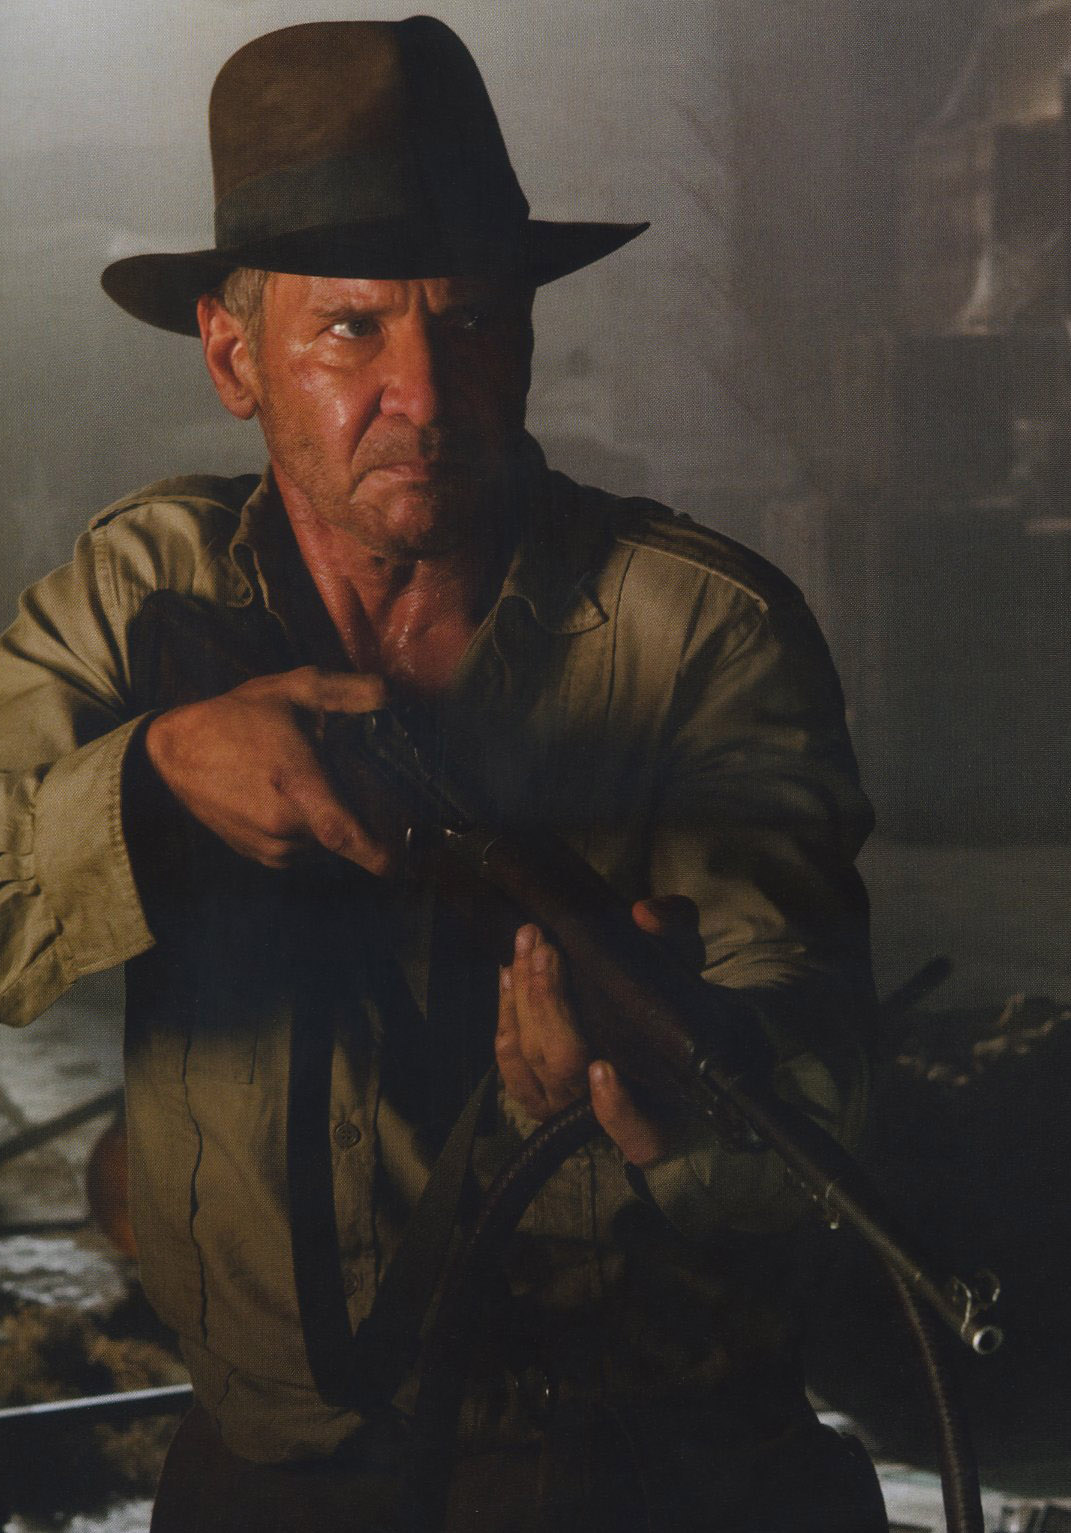 Harrison Ford in Indiana Jones and the Kingdom of the Crystal Skull (Paramount Pictures)